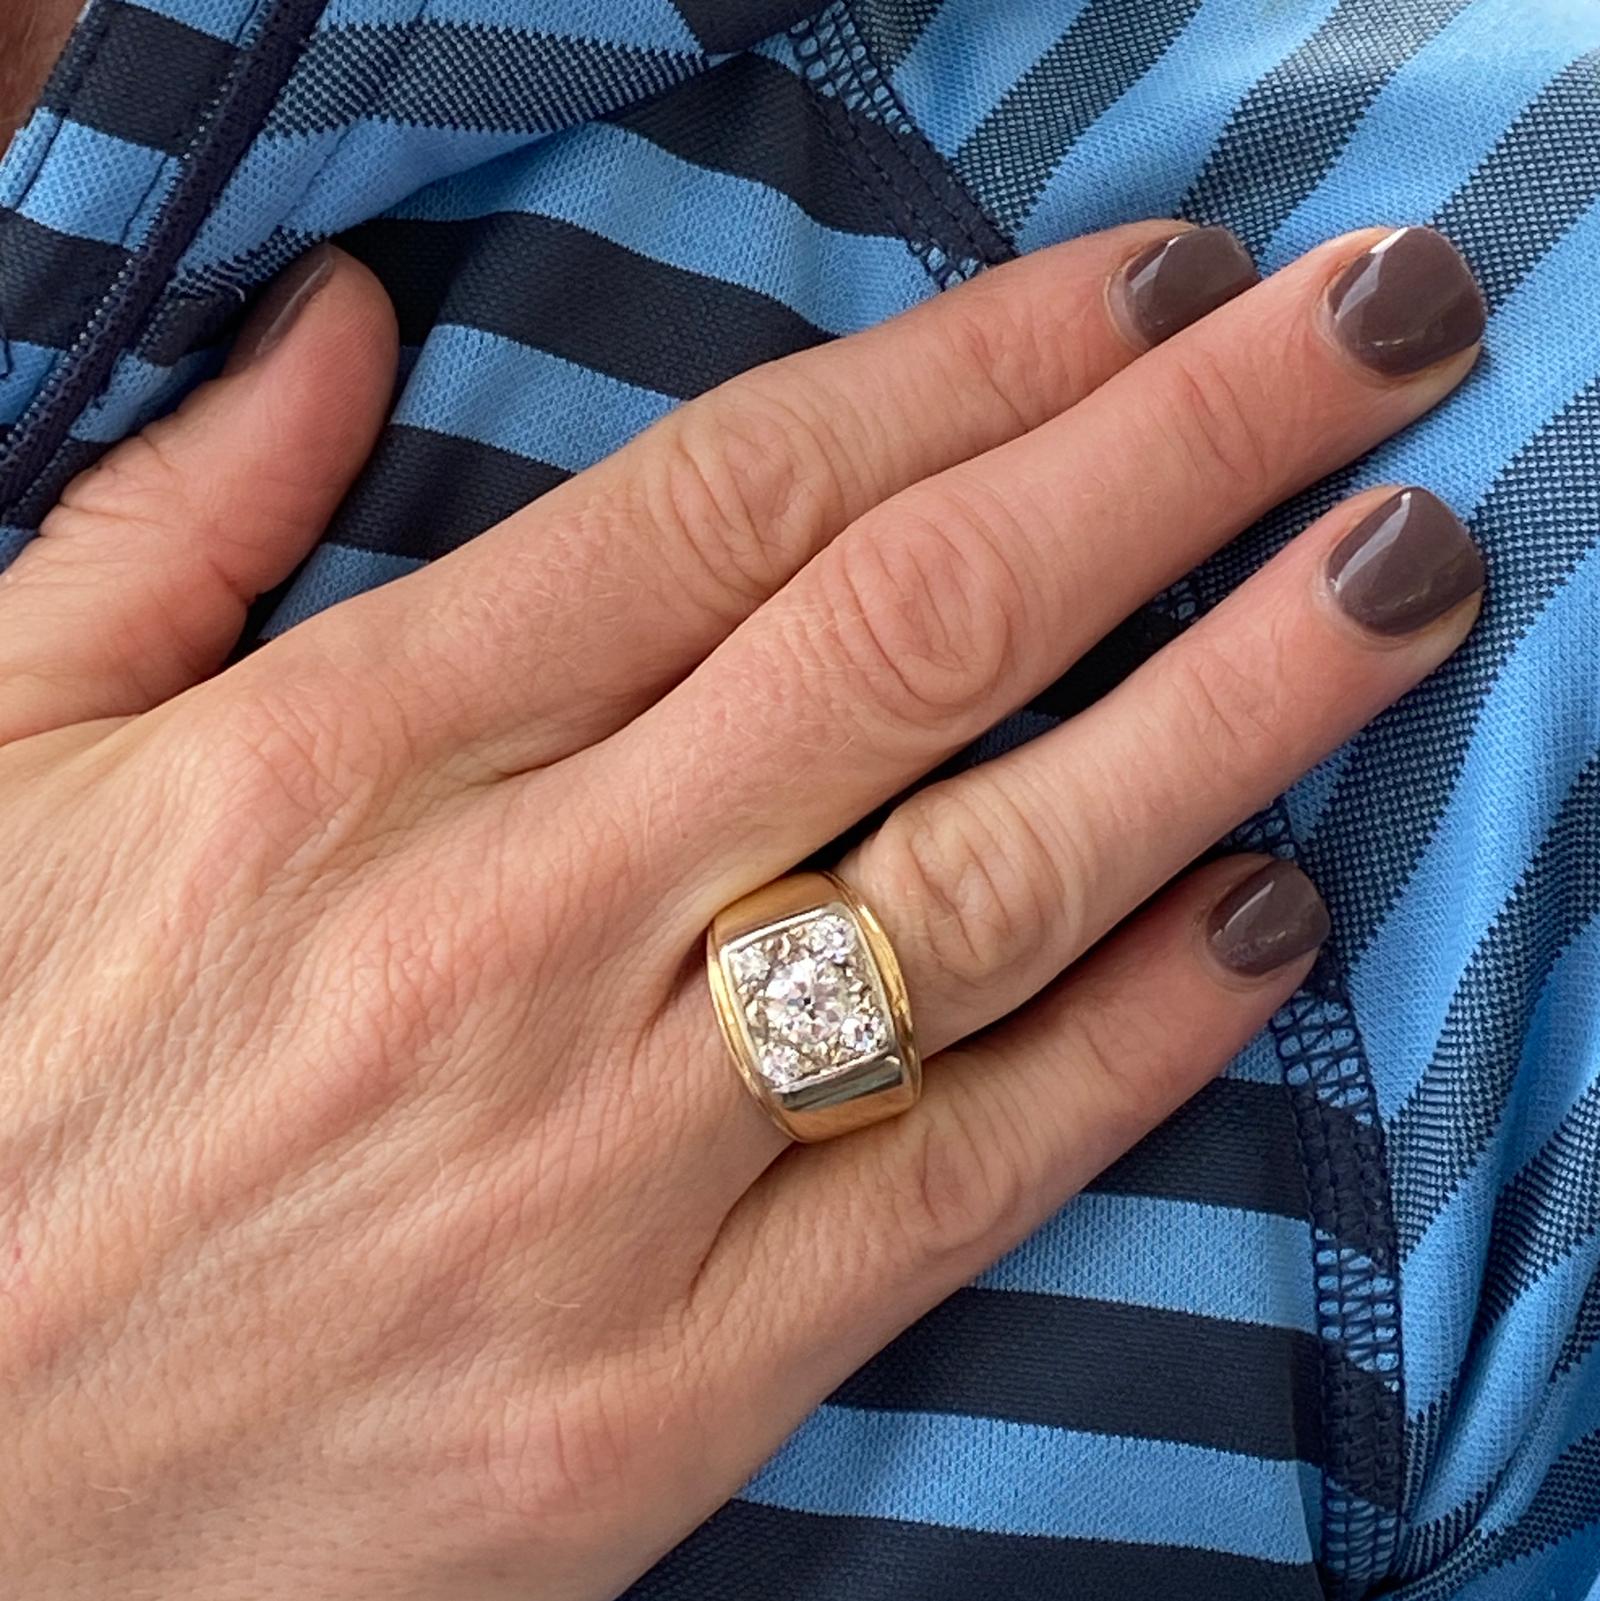 Vintage Old European cut diamond ring fashioned in 14 karat yellow gold. The ring features an Old European cut center diamond weighing .95 carats and another 4 surrounding diamonds weighing ,40 carat total weight. The diamonds are graded G-H color